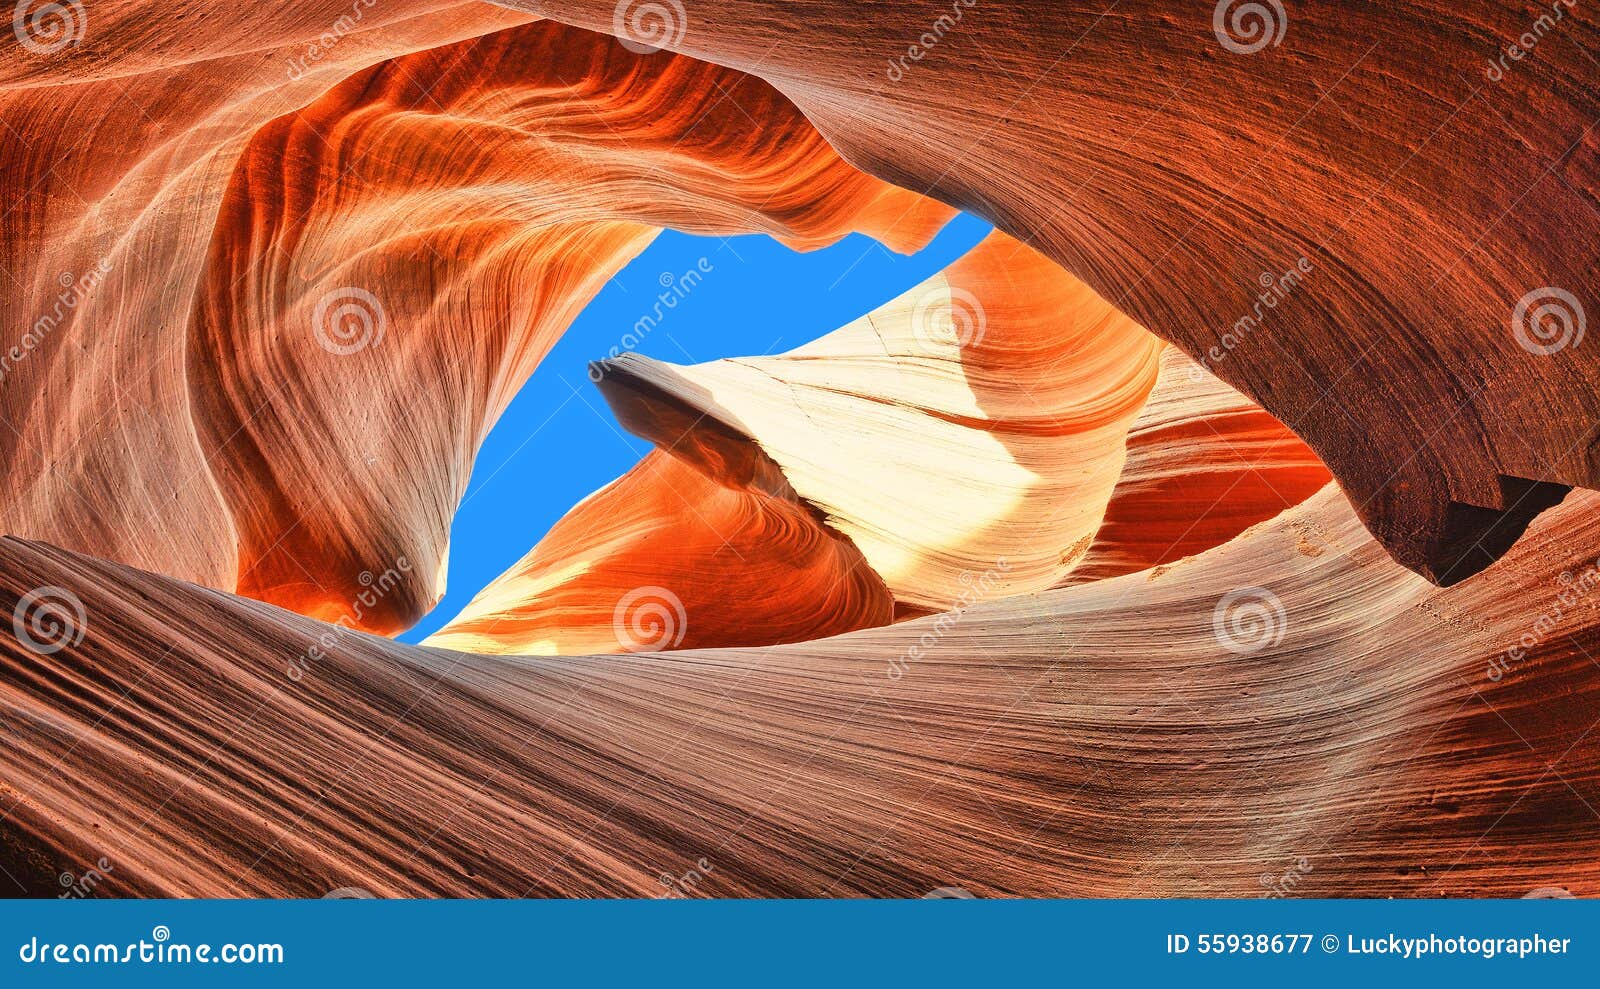 blue sky in antelope canyon